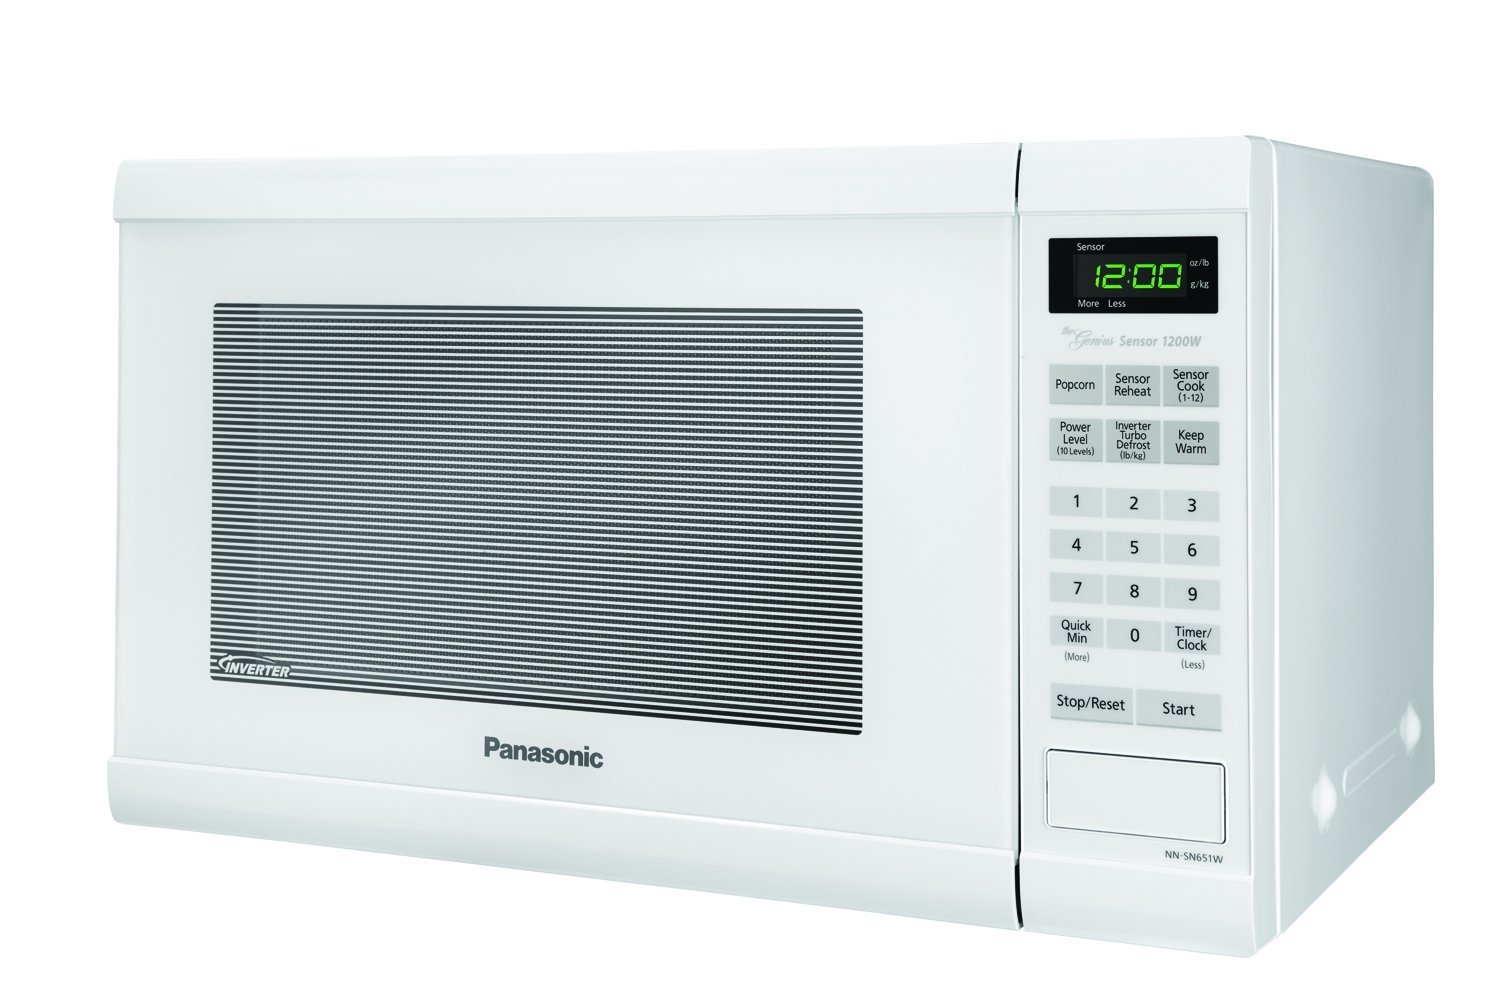 Microwave Oven Compact Countertop Panasonic Electric White 1200 Watt 1.2 cu. ft. Inverter Cookware With Free Pot Holders